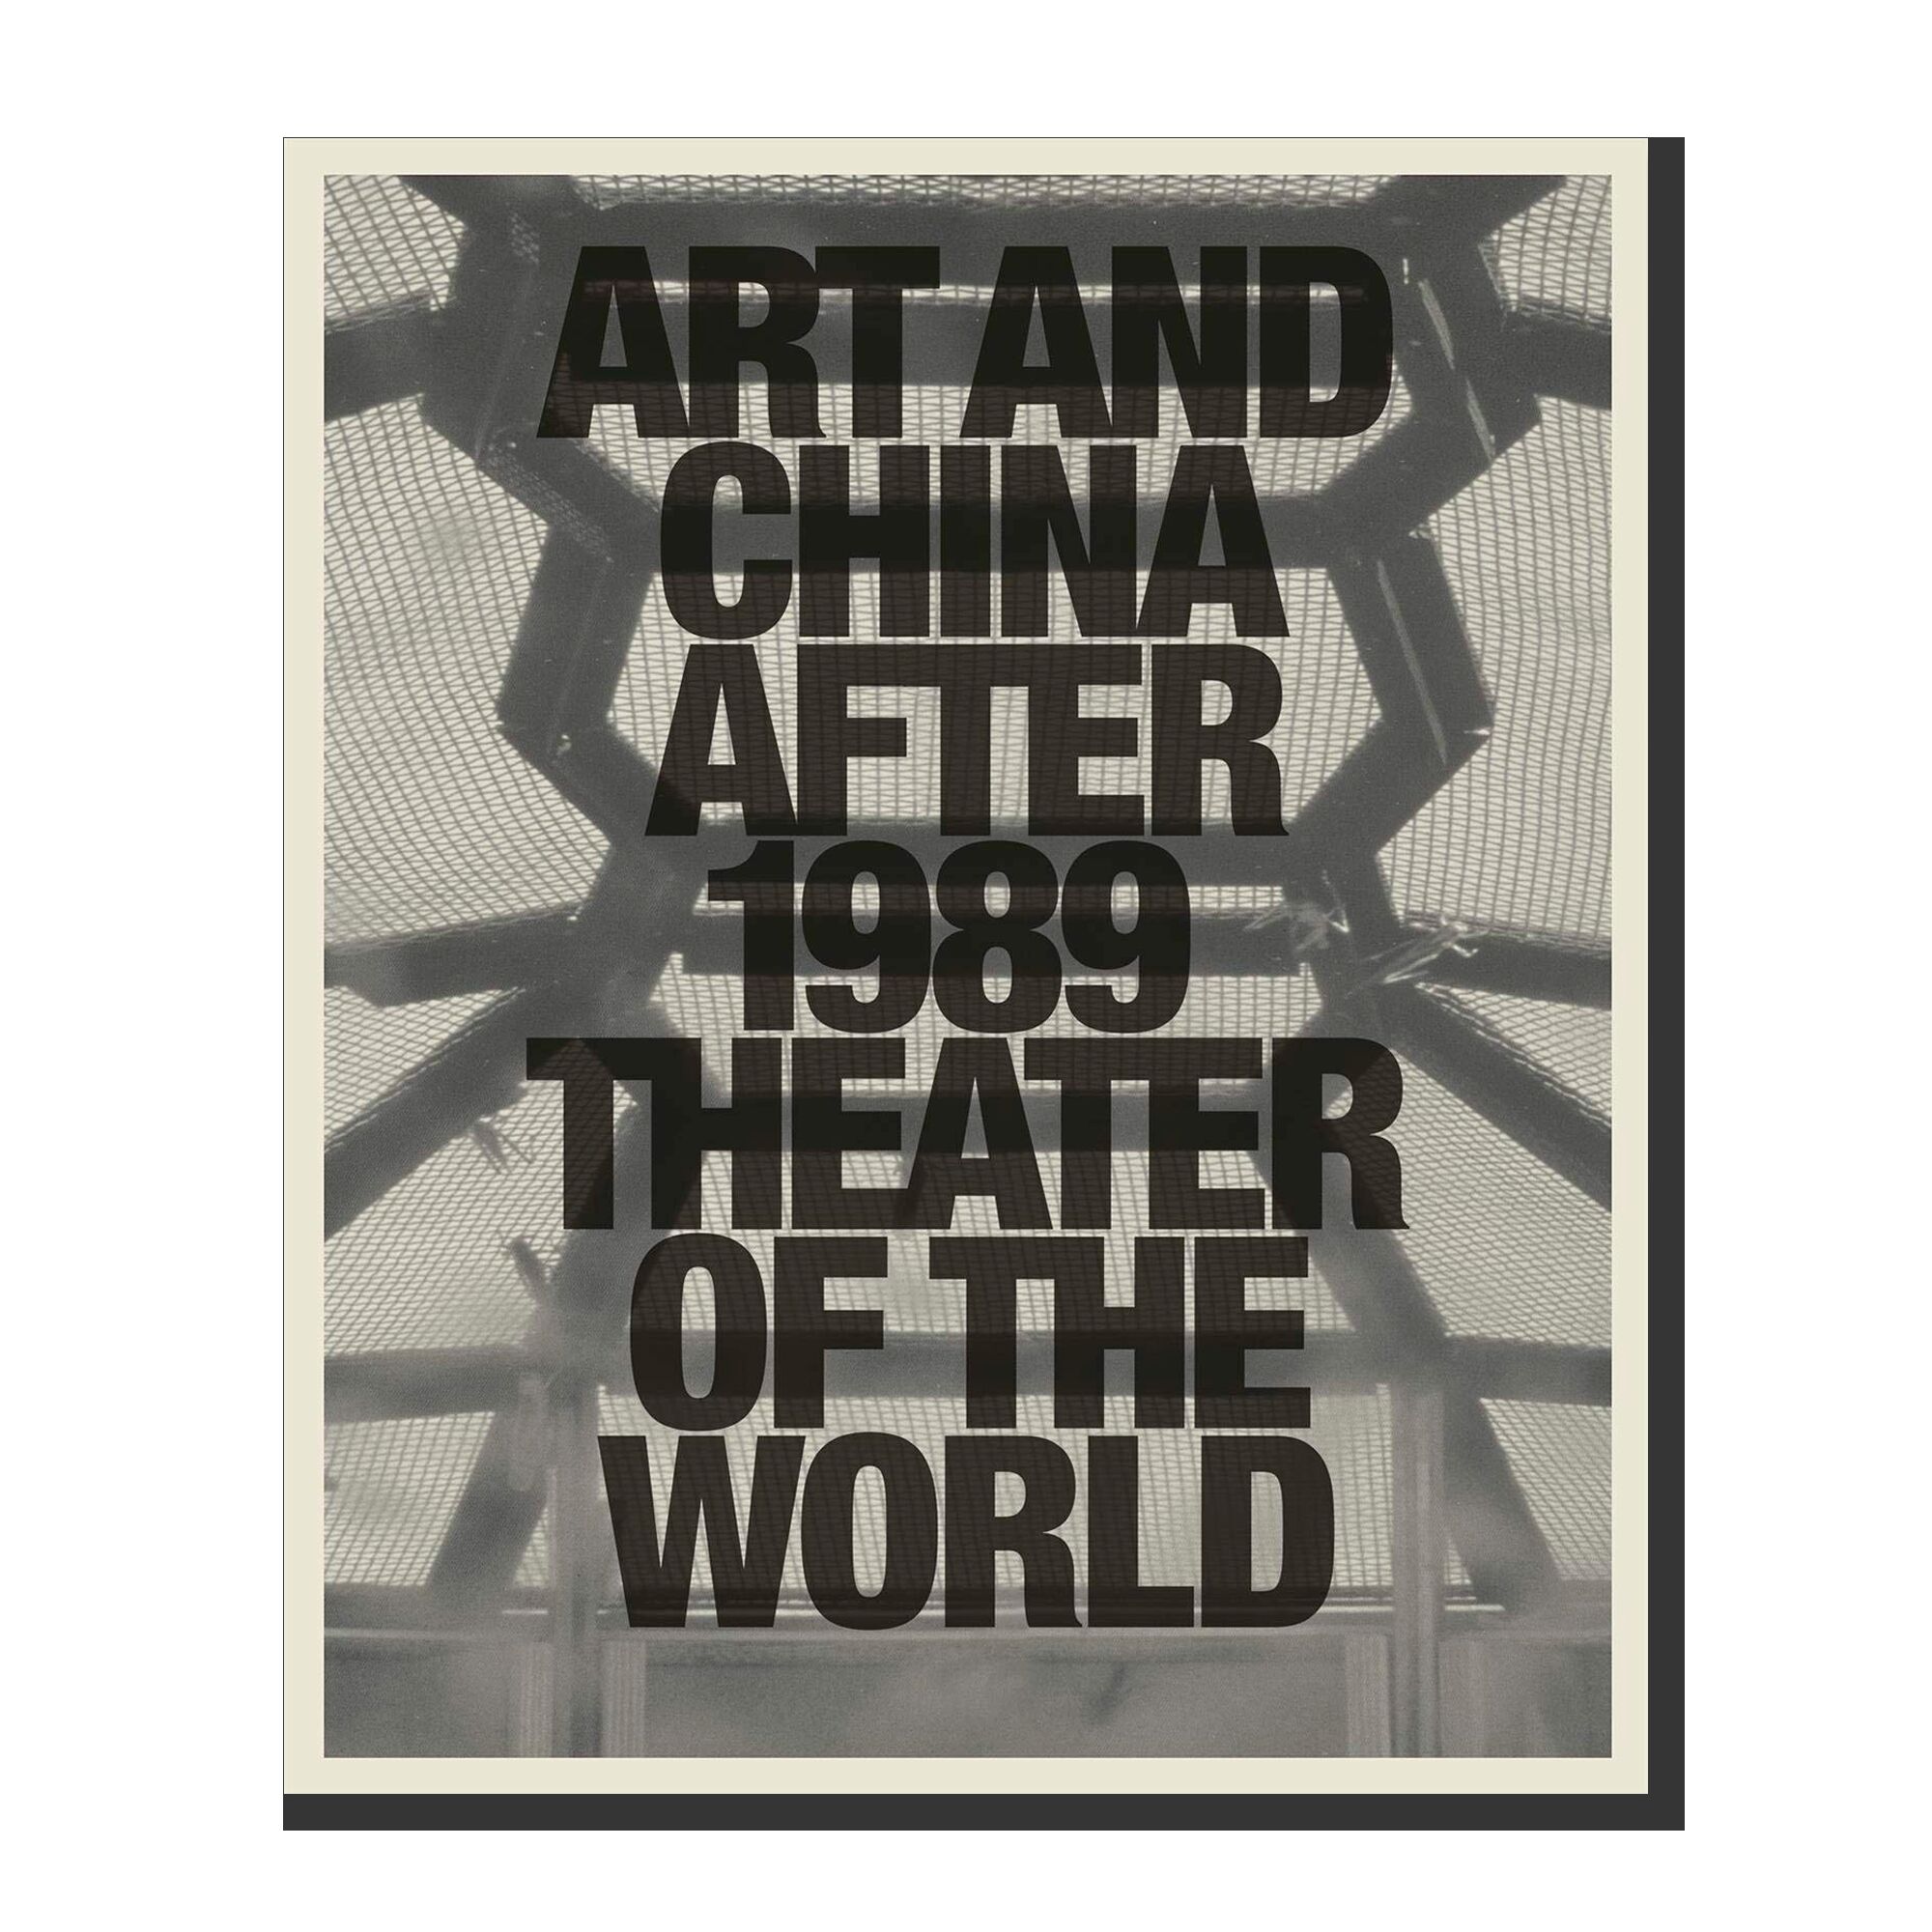 Art and China after 1989: Theater of the World